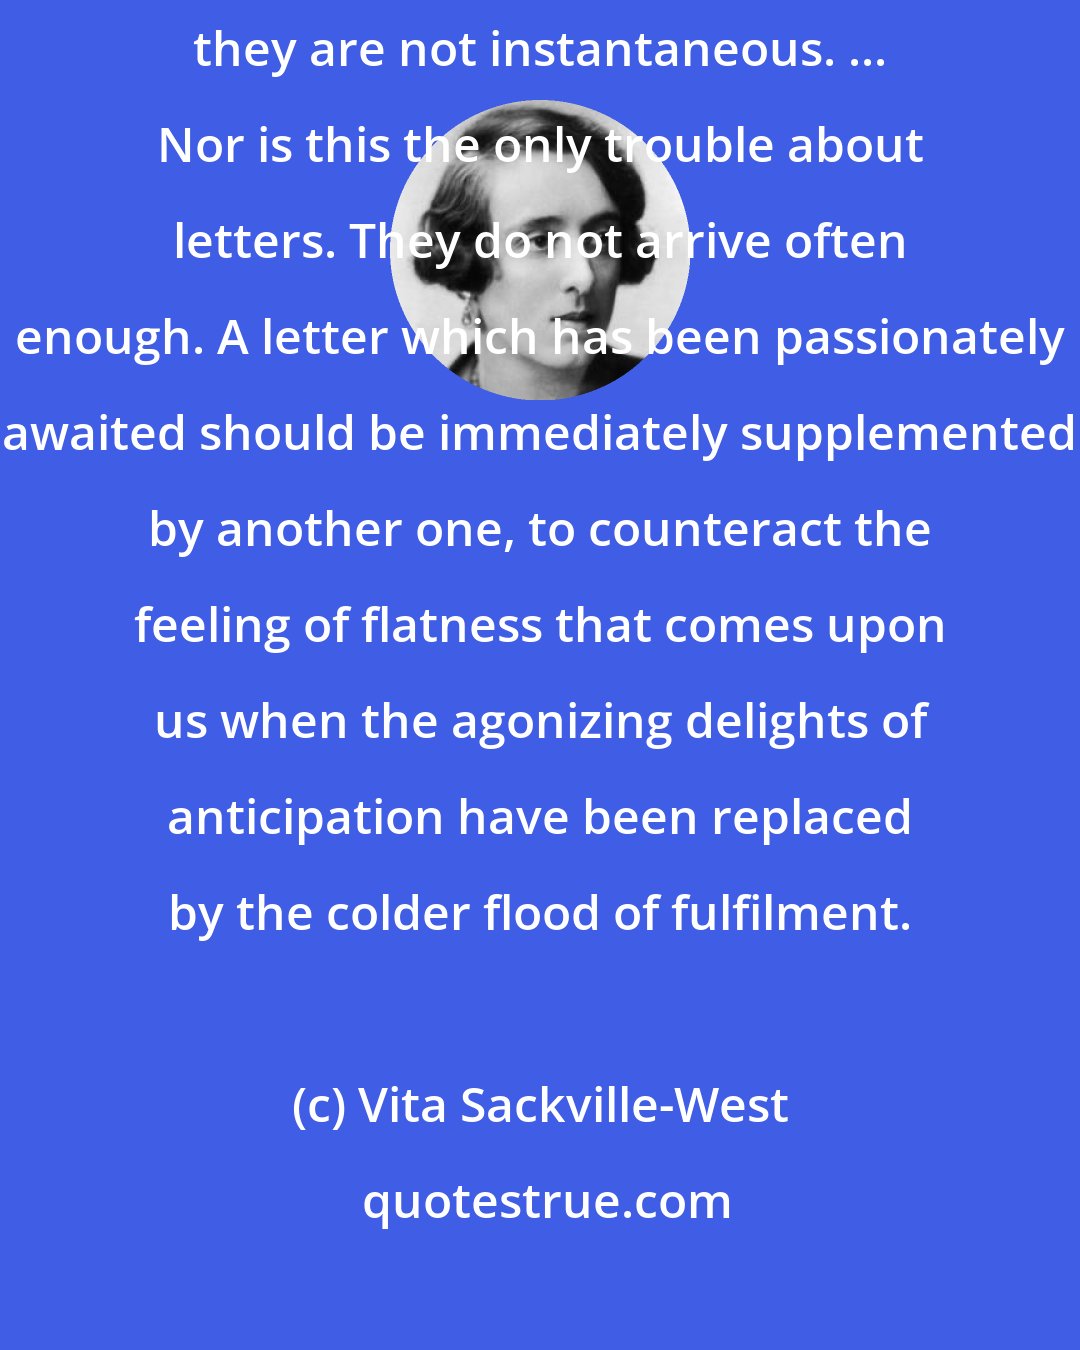 Vita Sackville-West: There is something intrinsically wrong about letters. For one thing they are not instantaneous. ... Nor is this the only trouble about letters. They do not arrive often enough. A letter which has been passionately awaited should be immediately supplemented by another one, to counteract the feeling of flatness that comes upon us when the agonizing delights of anticipation have been replaced by the colder flood of fulfilment.